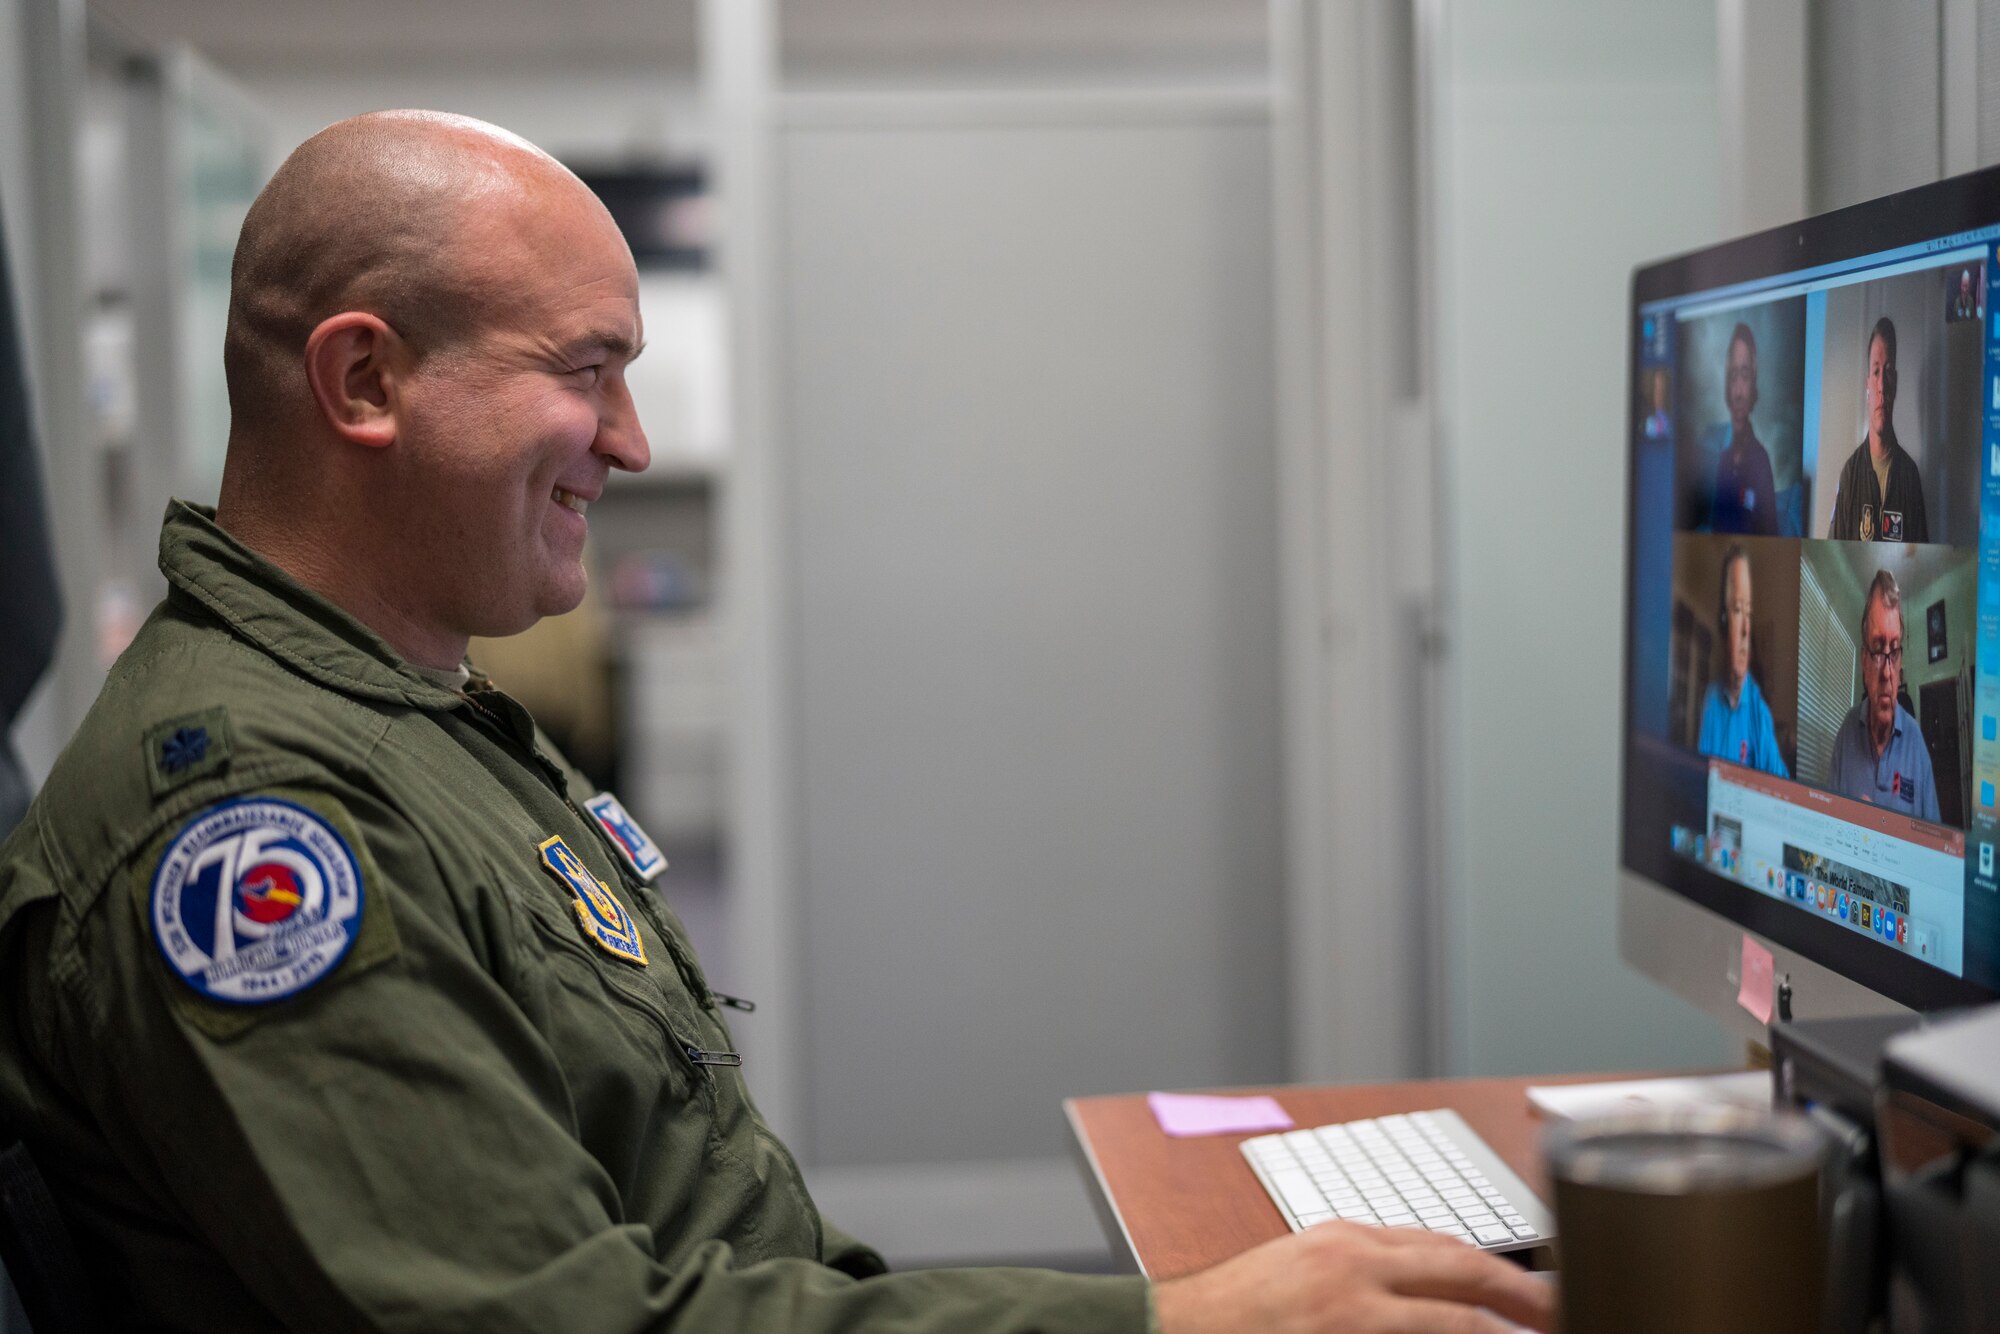 Lt. Col. Ryan Rickert,  53rd Weather Reconnaissance Squadron aerial reconnaissance weather officer, talks live via Skype with the host and participants of the National Tropical Weather Conference May 21, 2020, at Keesler Air Force Base, Mississippi. Rickert was accompanied by Capt. Garret Black, 53rd WRS ARWO, online to explain the Hurricane Hunter mission, their experiences flying storms, and the importance of being prepared for hurricane season. (U.S. Air Force photo by Tech. Sgt. Christopher Carranza)